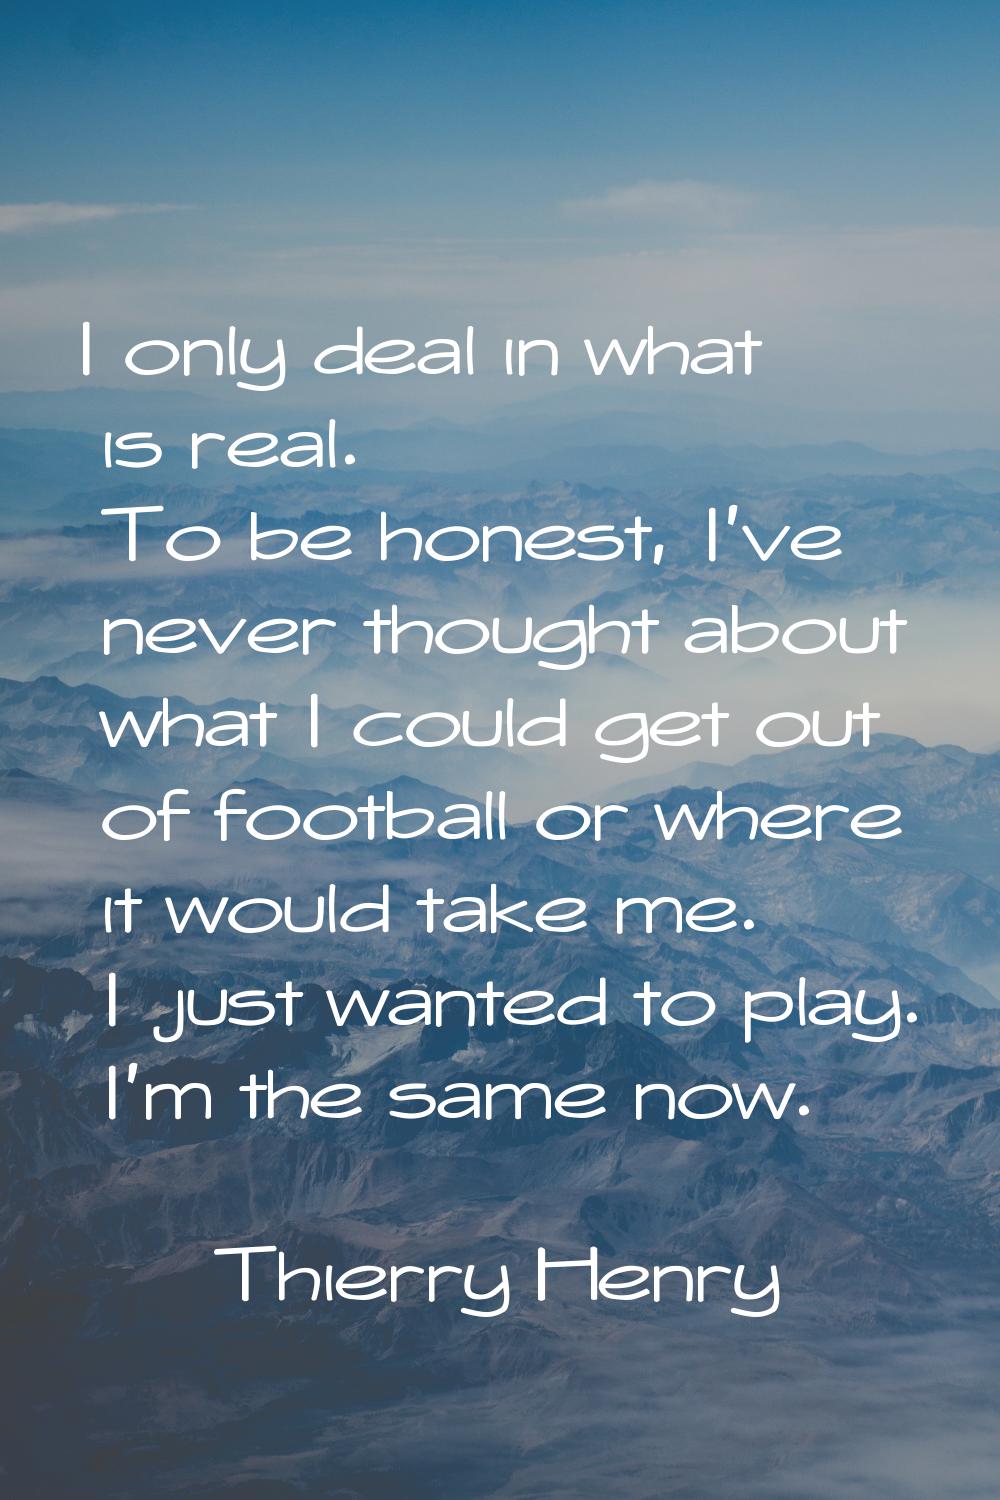 I only deal in what is real. To be honest, I've never thought about what I could get out of footbal